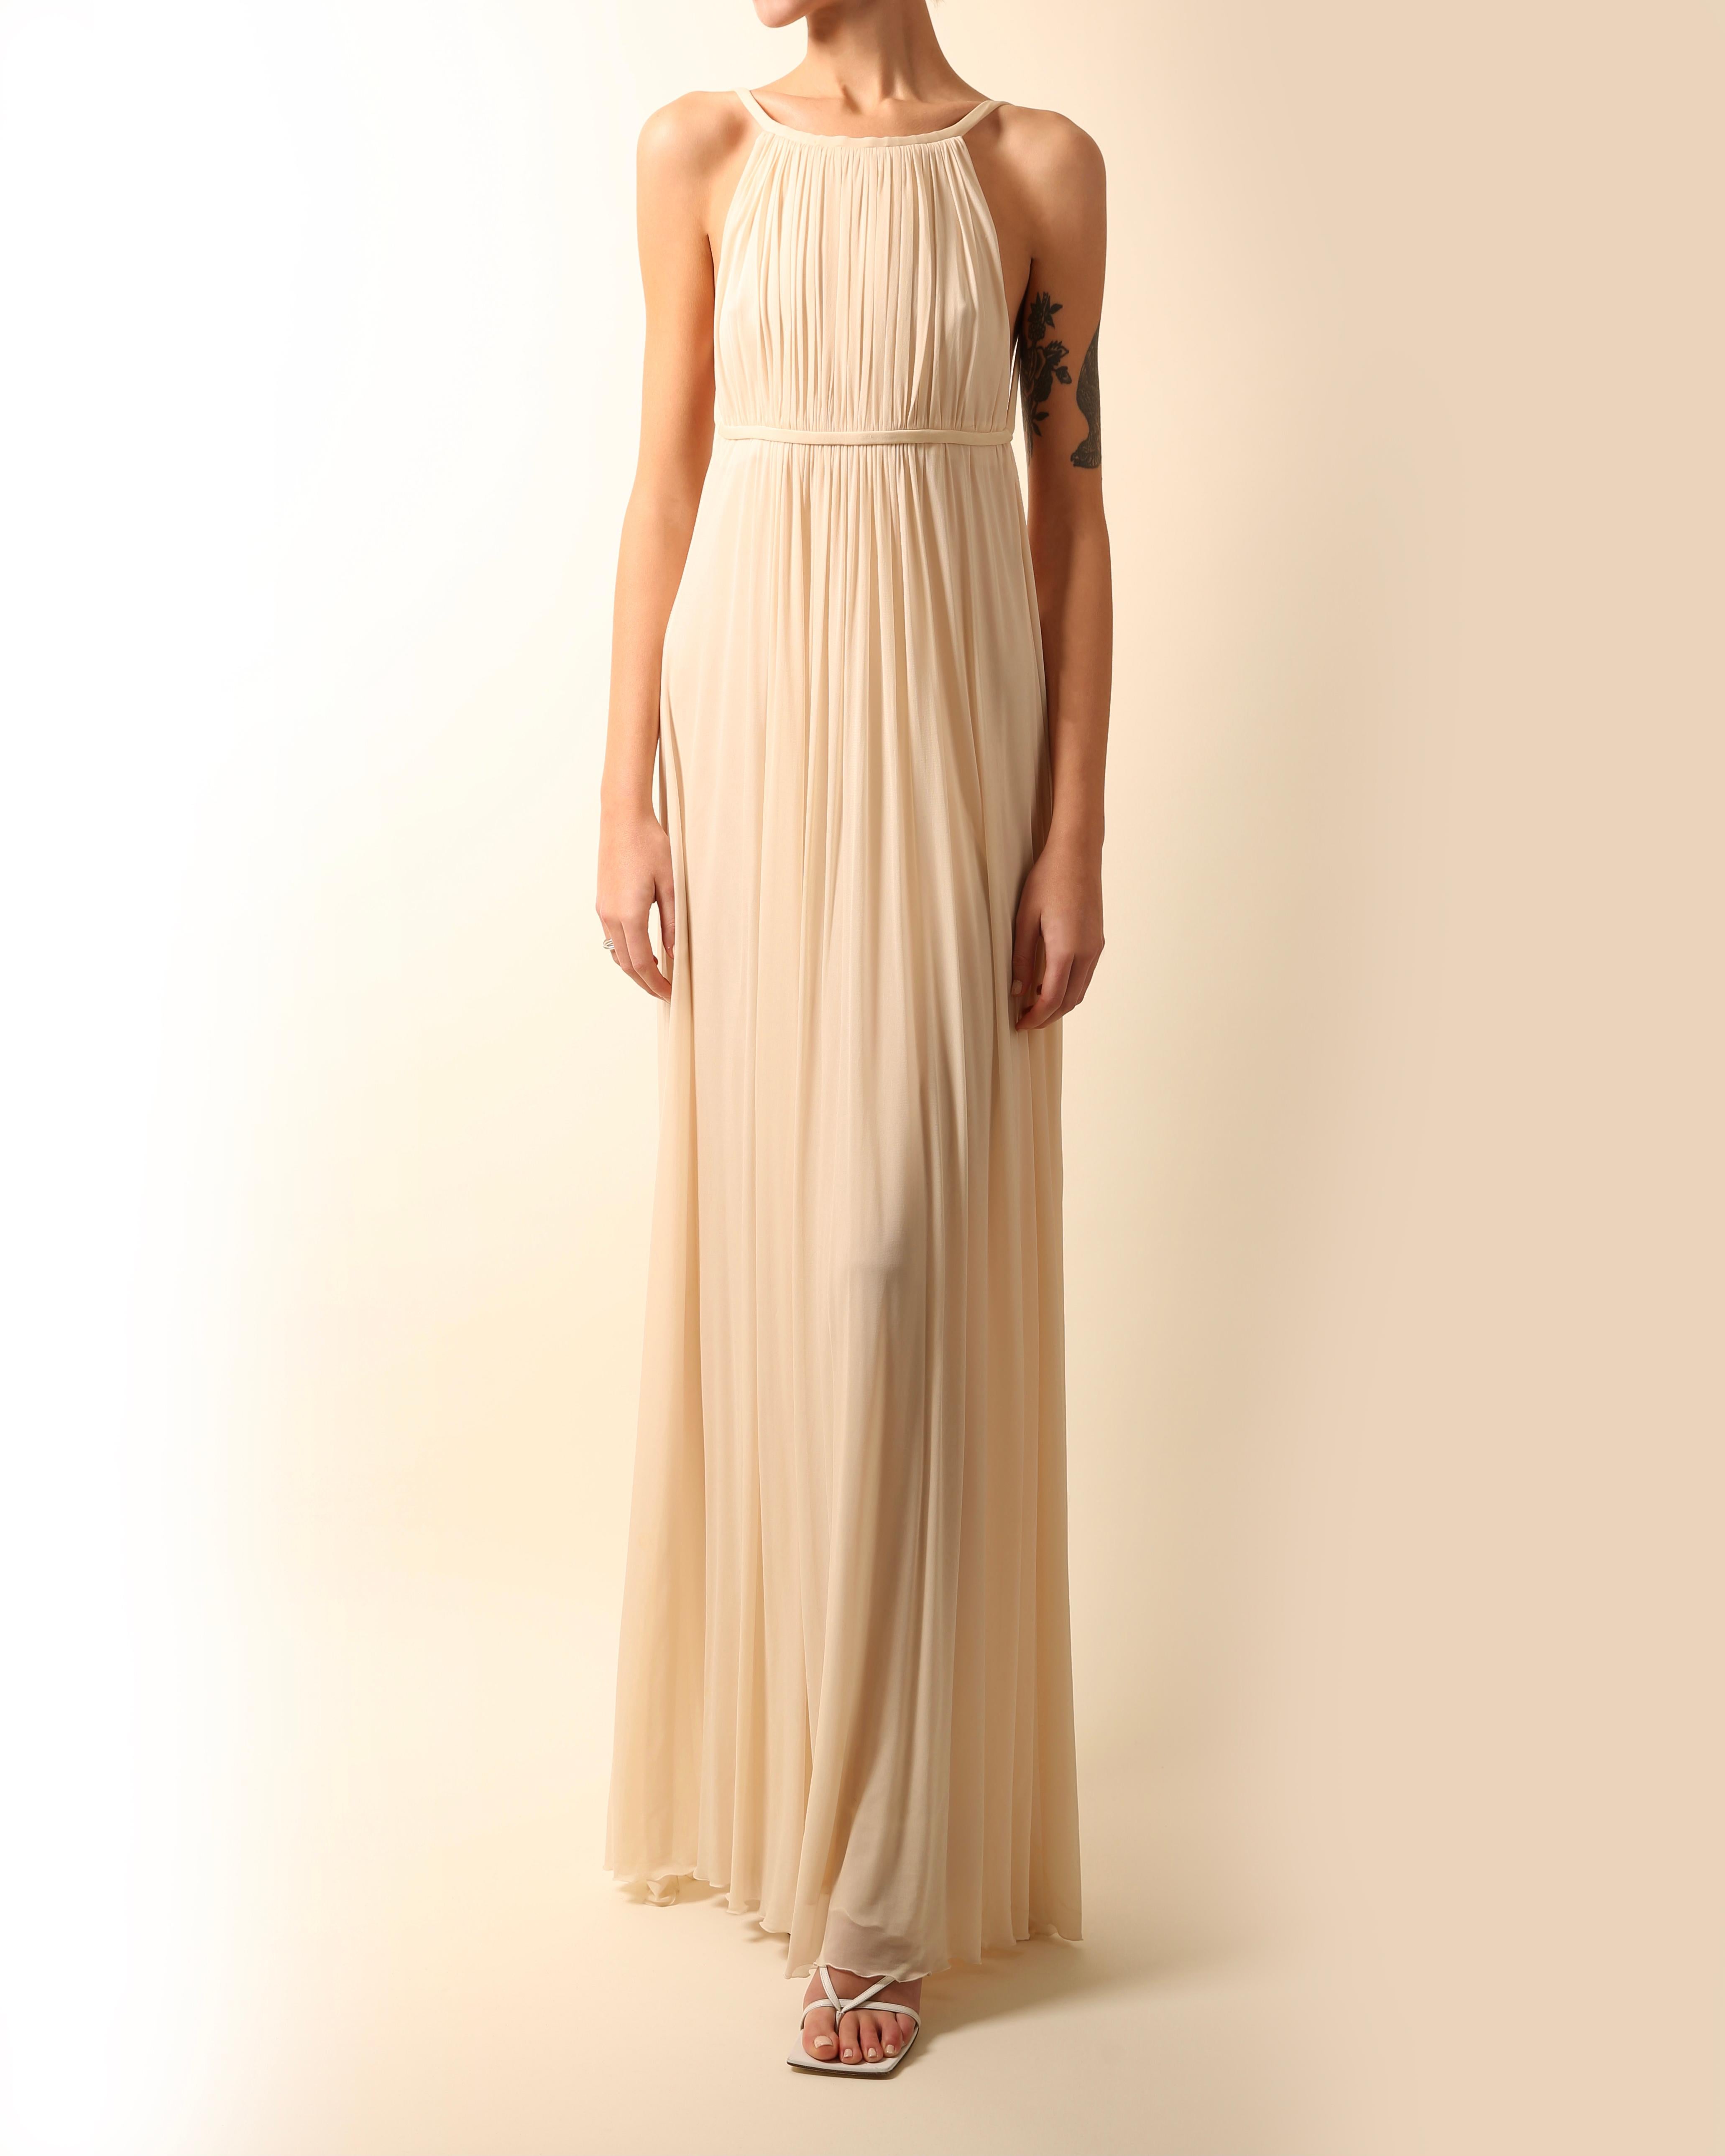 Halston 2009
Floor length grecian style plisse gown in cream
Completely backless cut

Composition:
100% Cupro

Size :
Marked as a size 42 - I believe this would be a FR 42 and not an IT 42. Due to the open bust and back this would work for a number